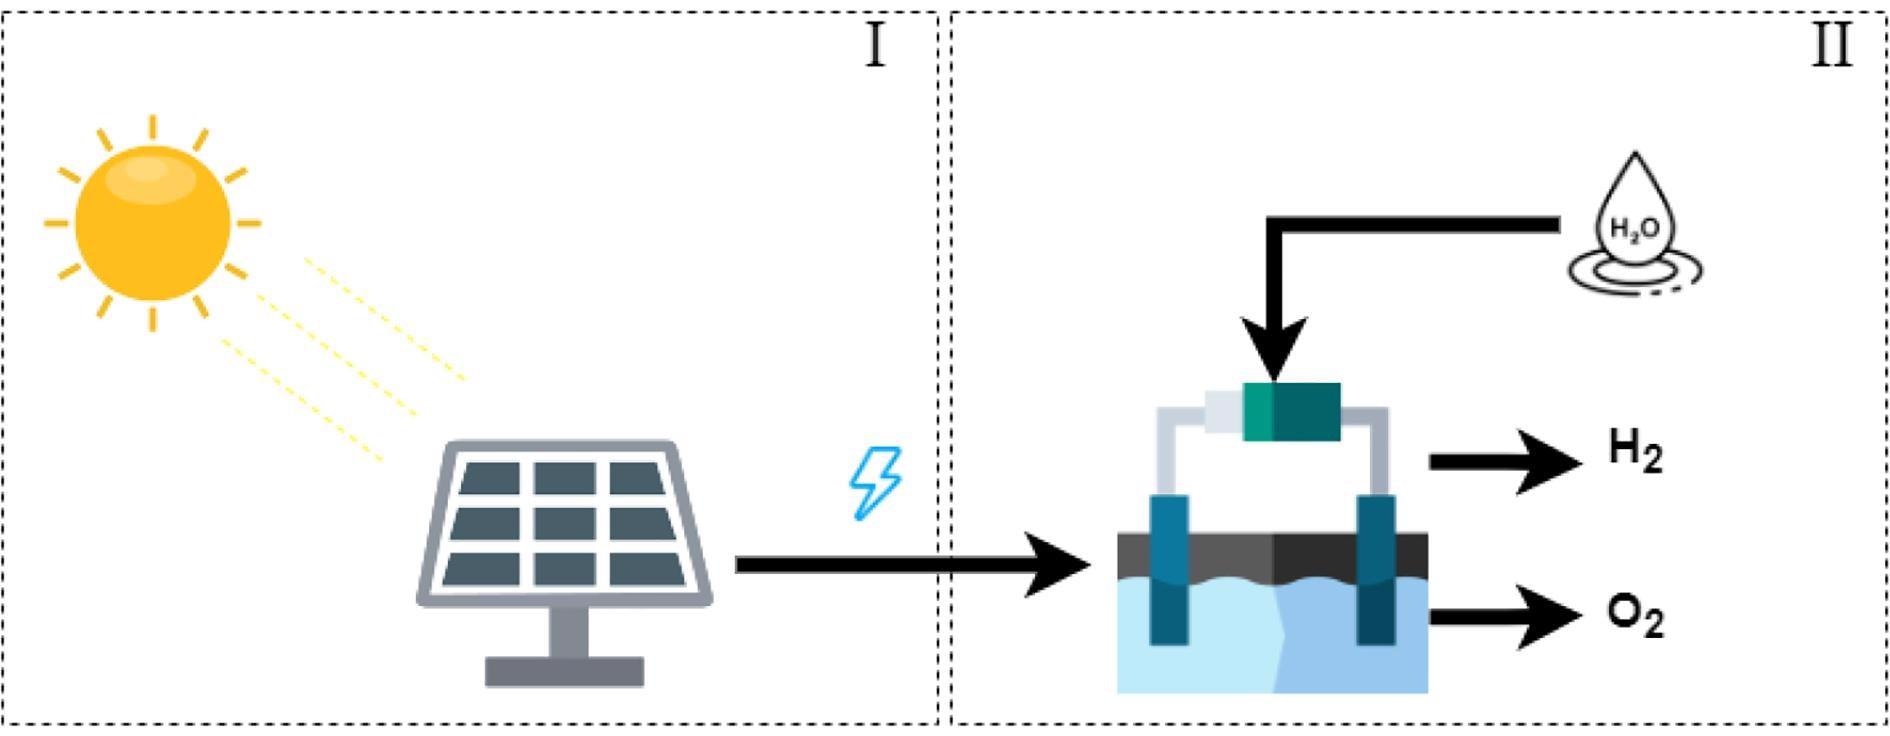 Schematic of PV-electrolysis: An indirect hydrogen production method in which first electricity is generated via the PV cell and that electricity is utilized in the electrolyzer to produce hydrogen.